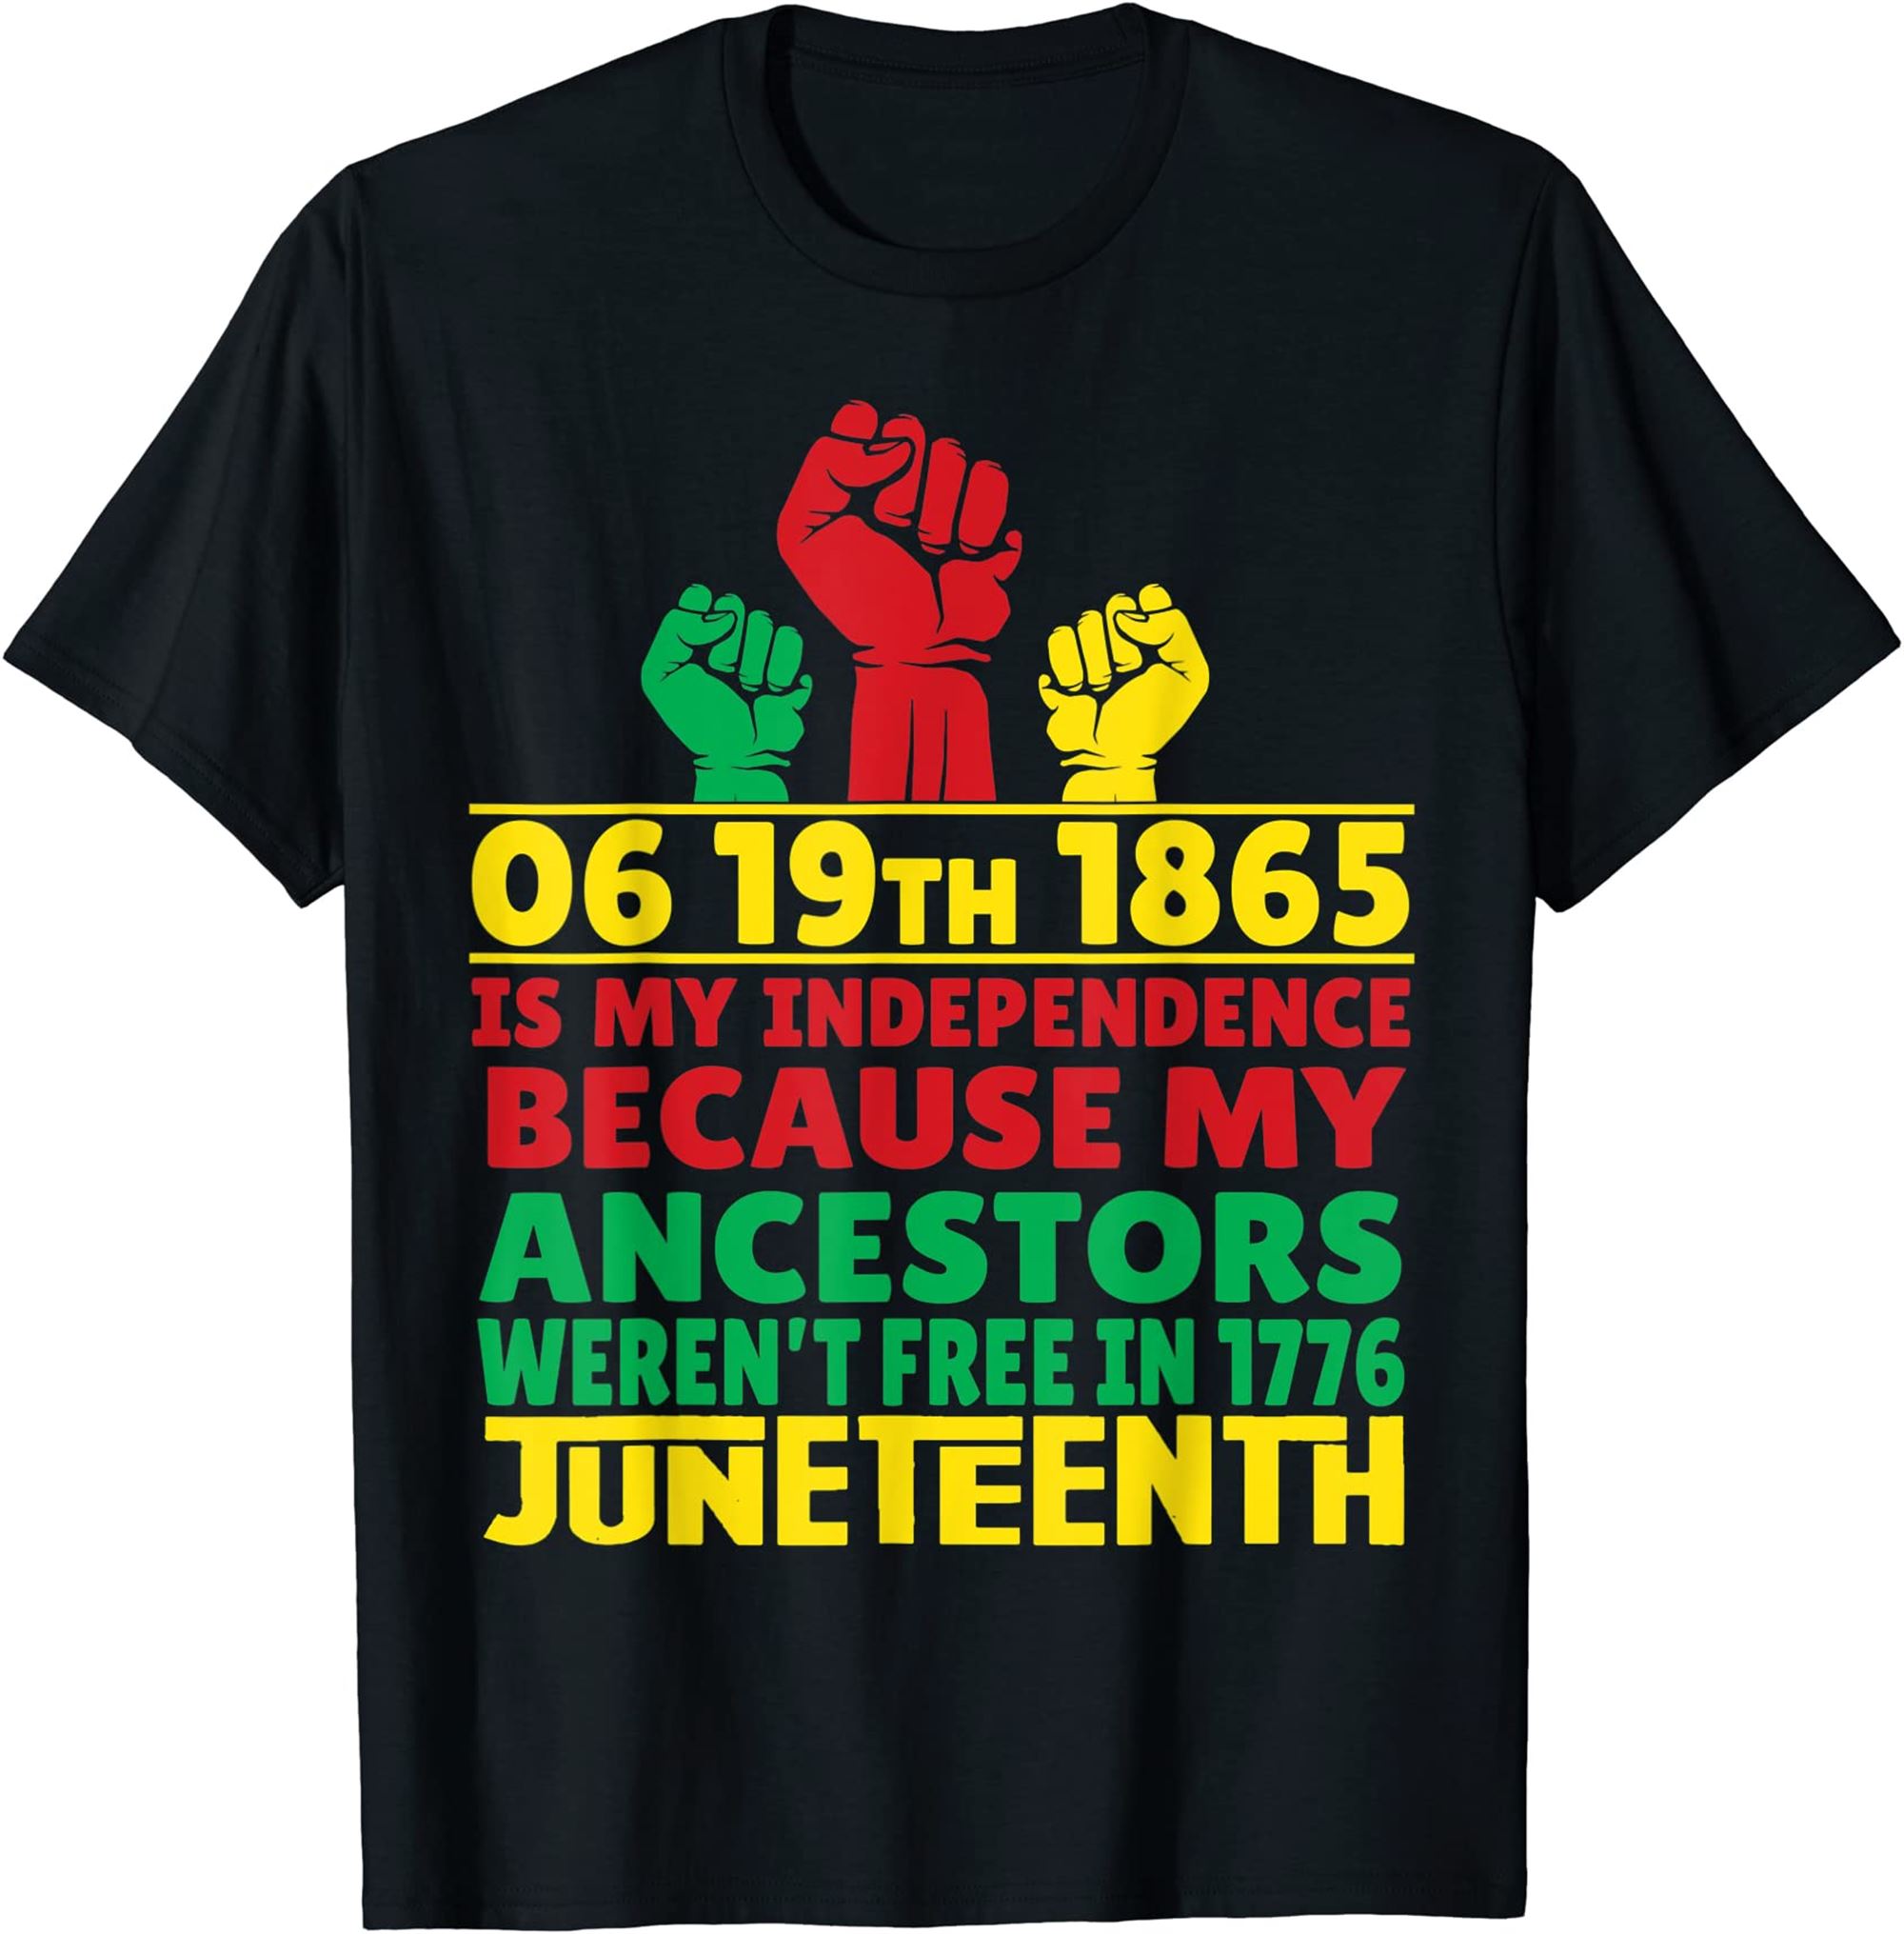 Happy Juneteenth Is My Independence Day Free Black 1865 T-shirt Full Size Up To 5xl